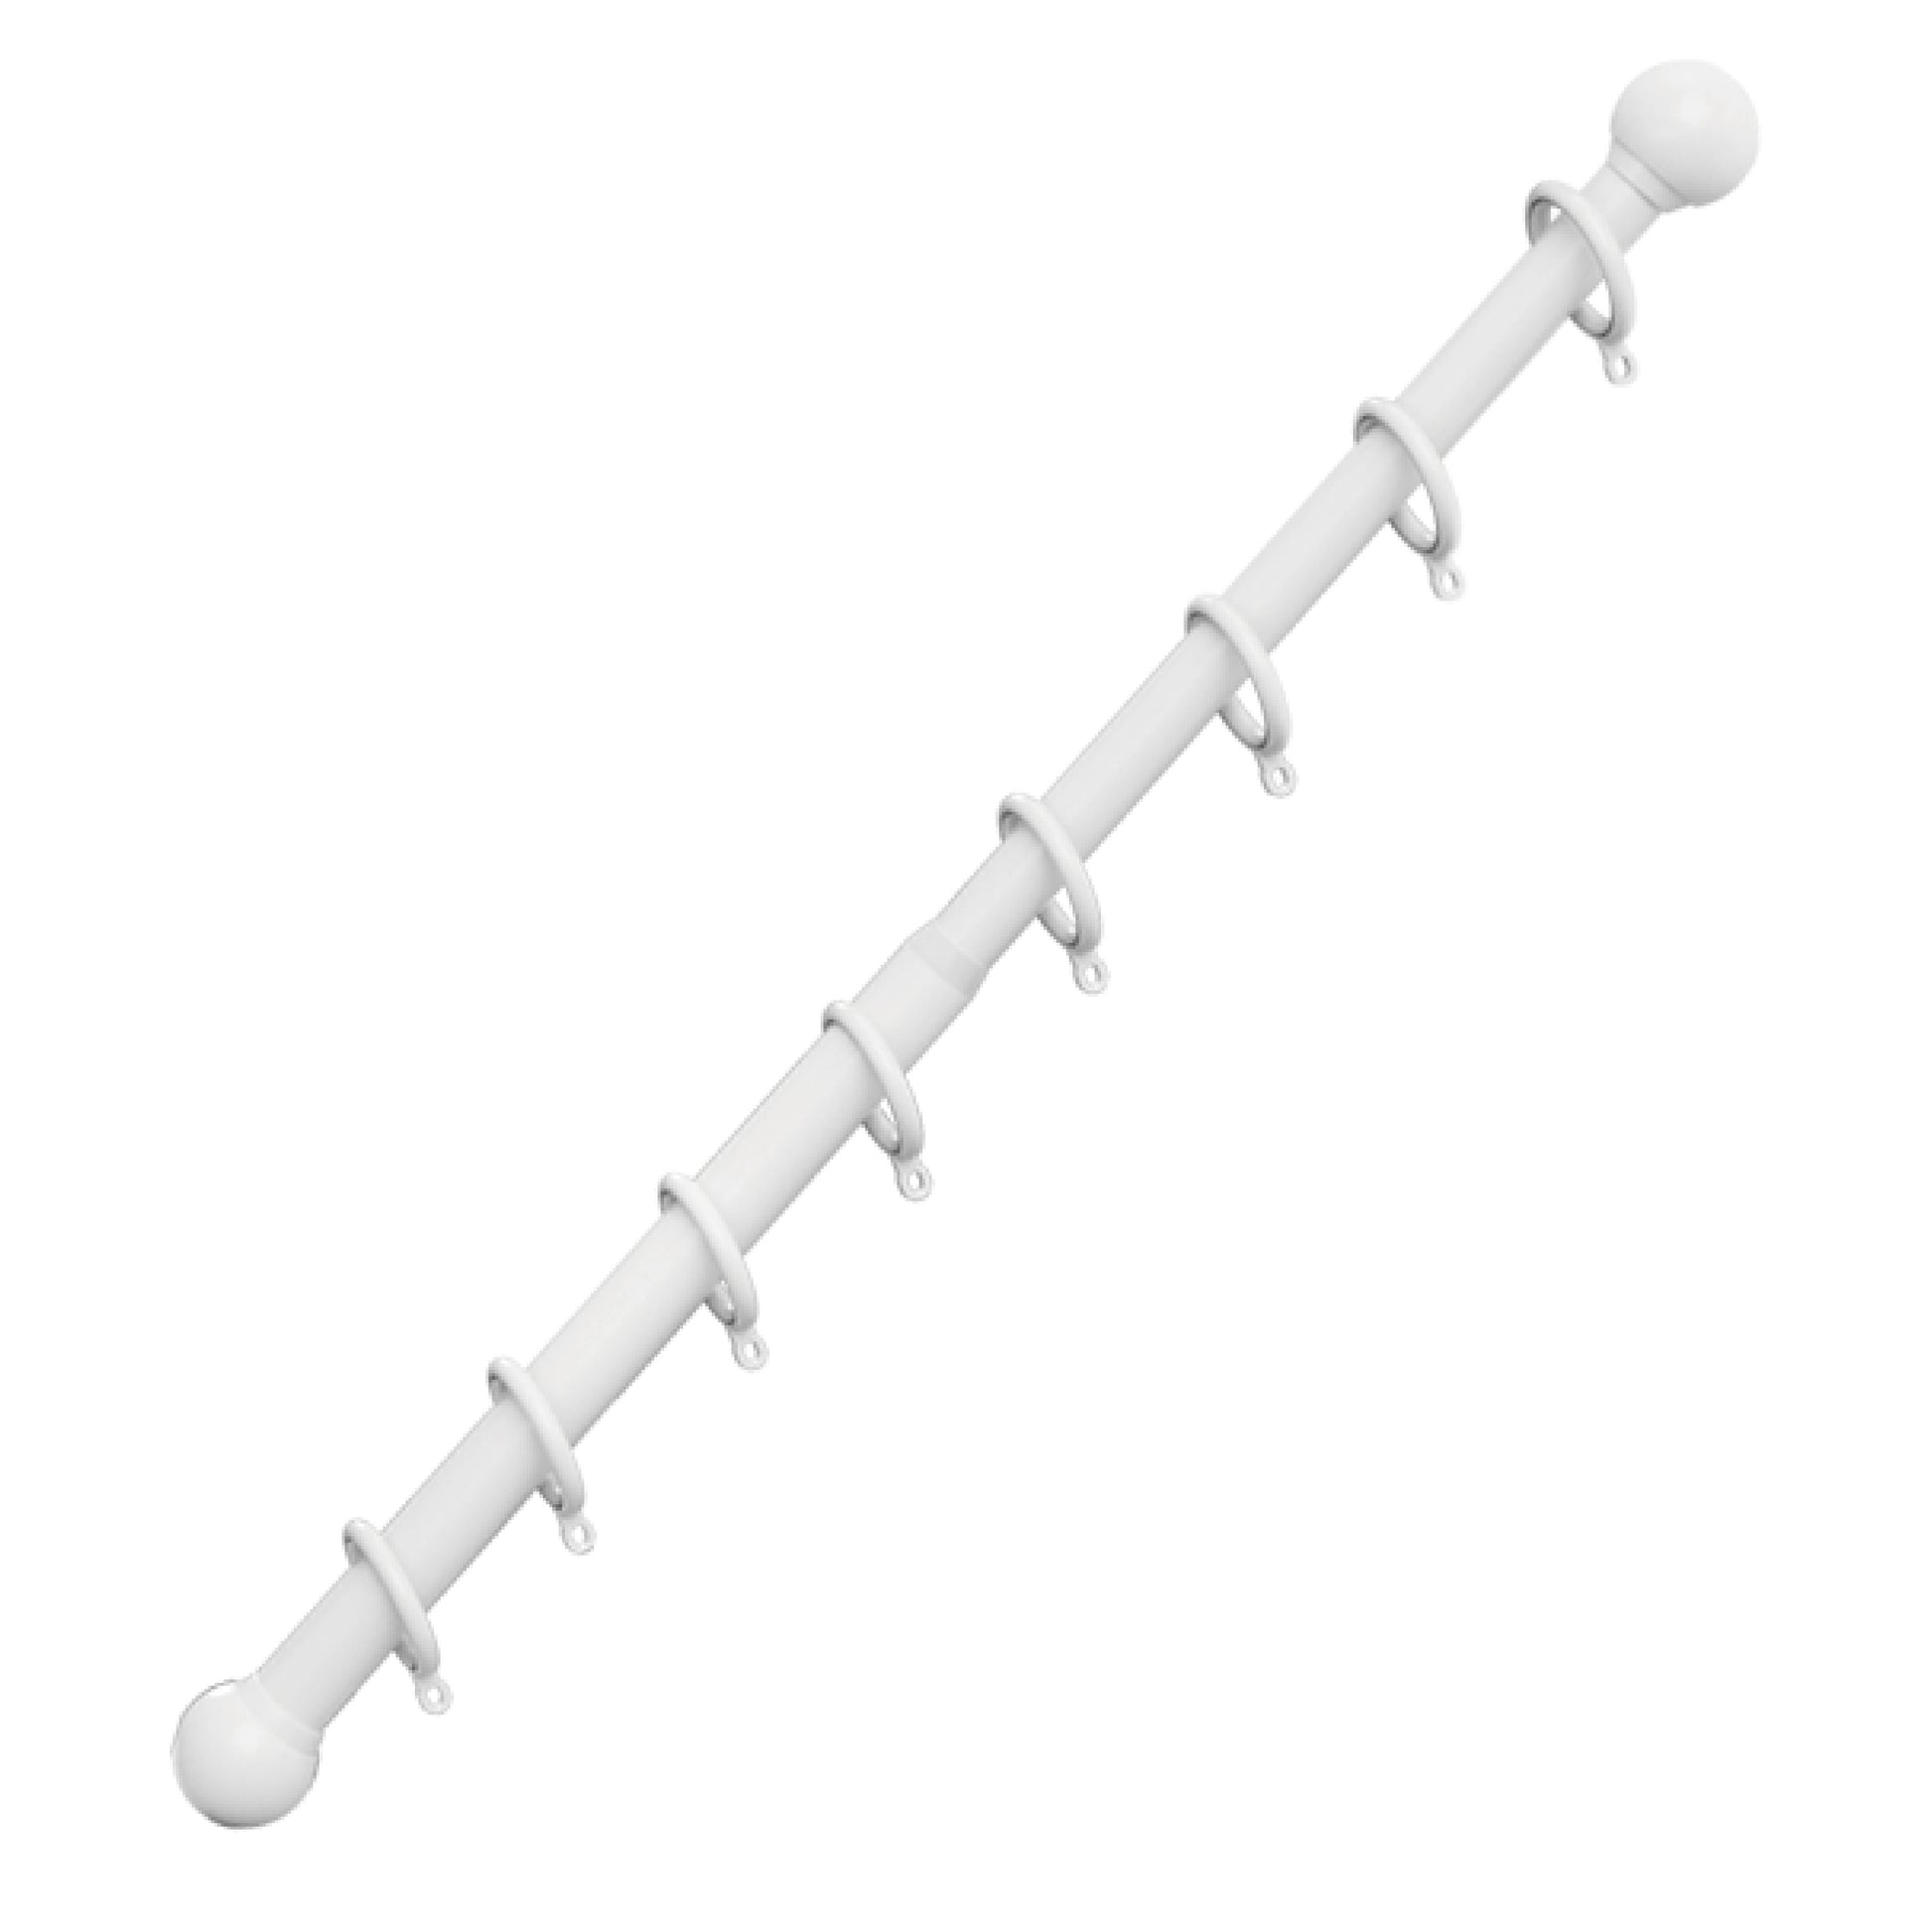 EaseGlide Whisper-Silent Telescoping Roman Rod in white with adjustable length and modern design, ideal for effortless curtain operation